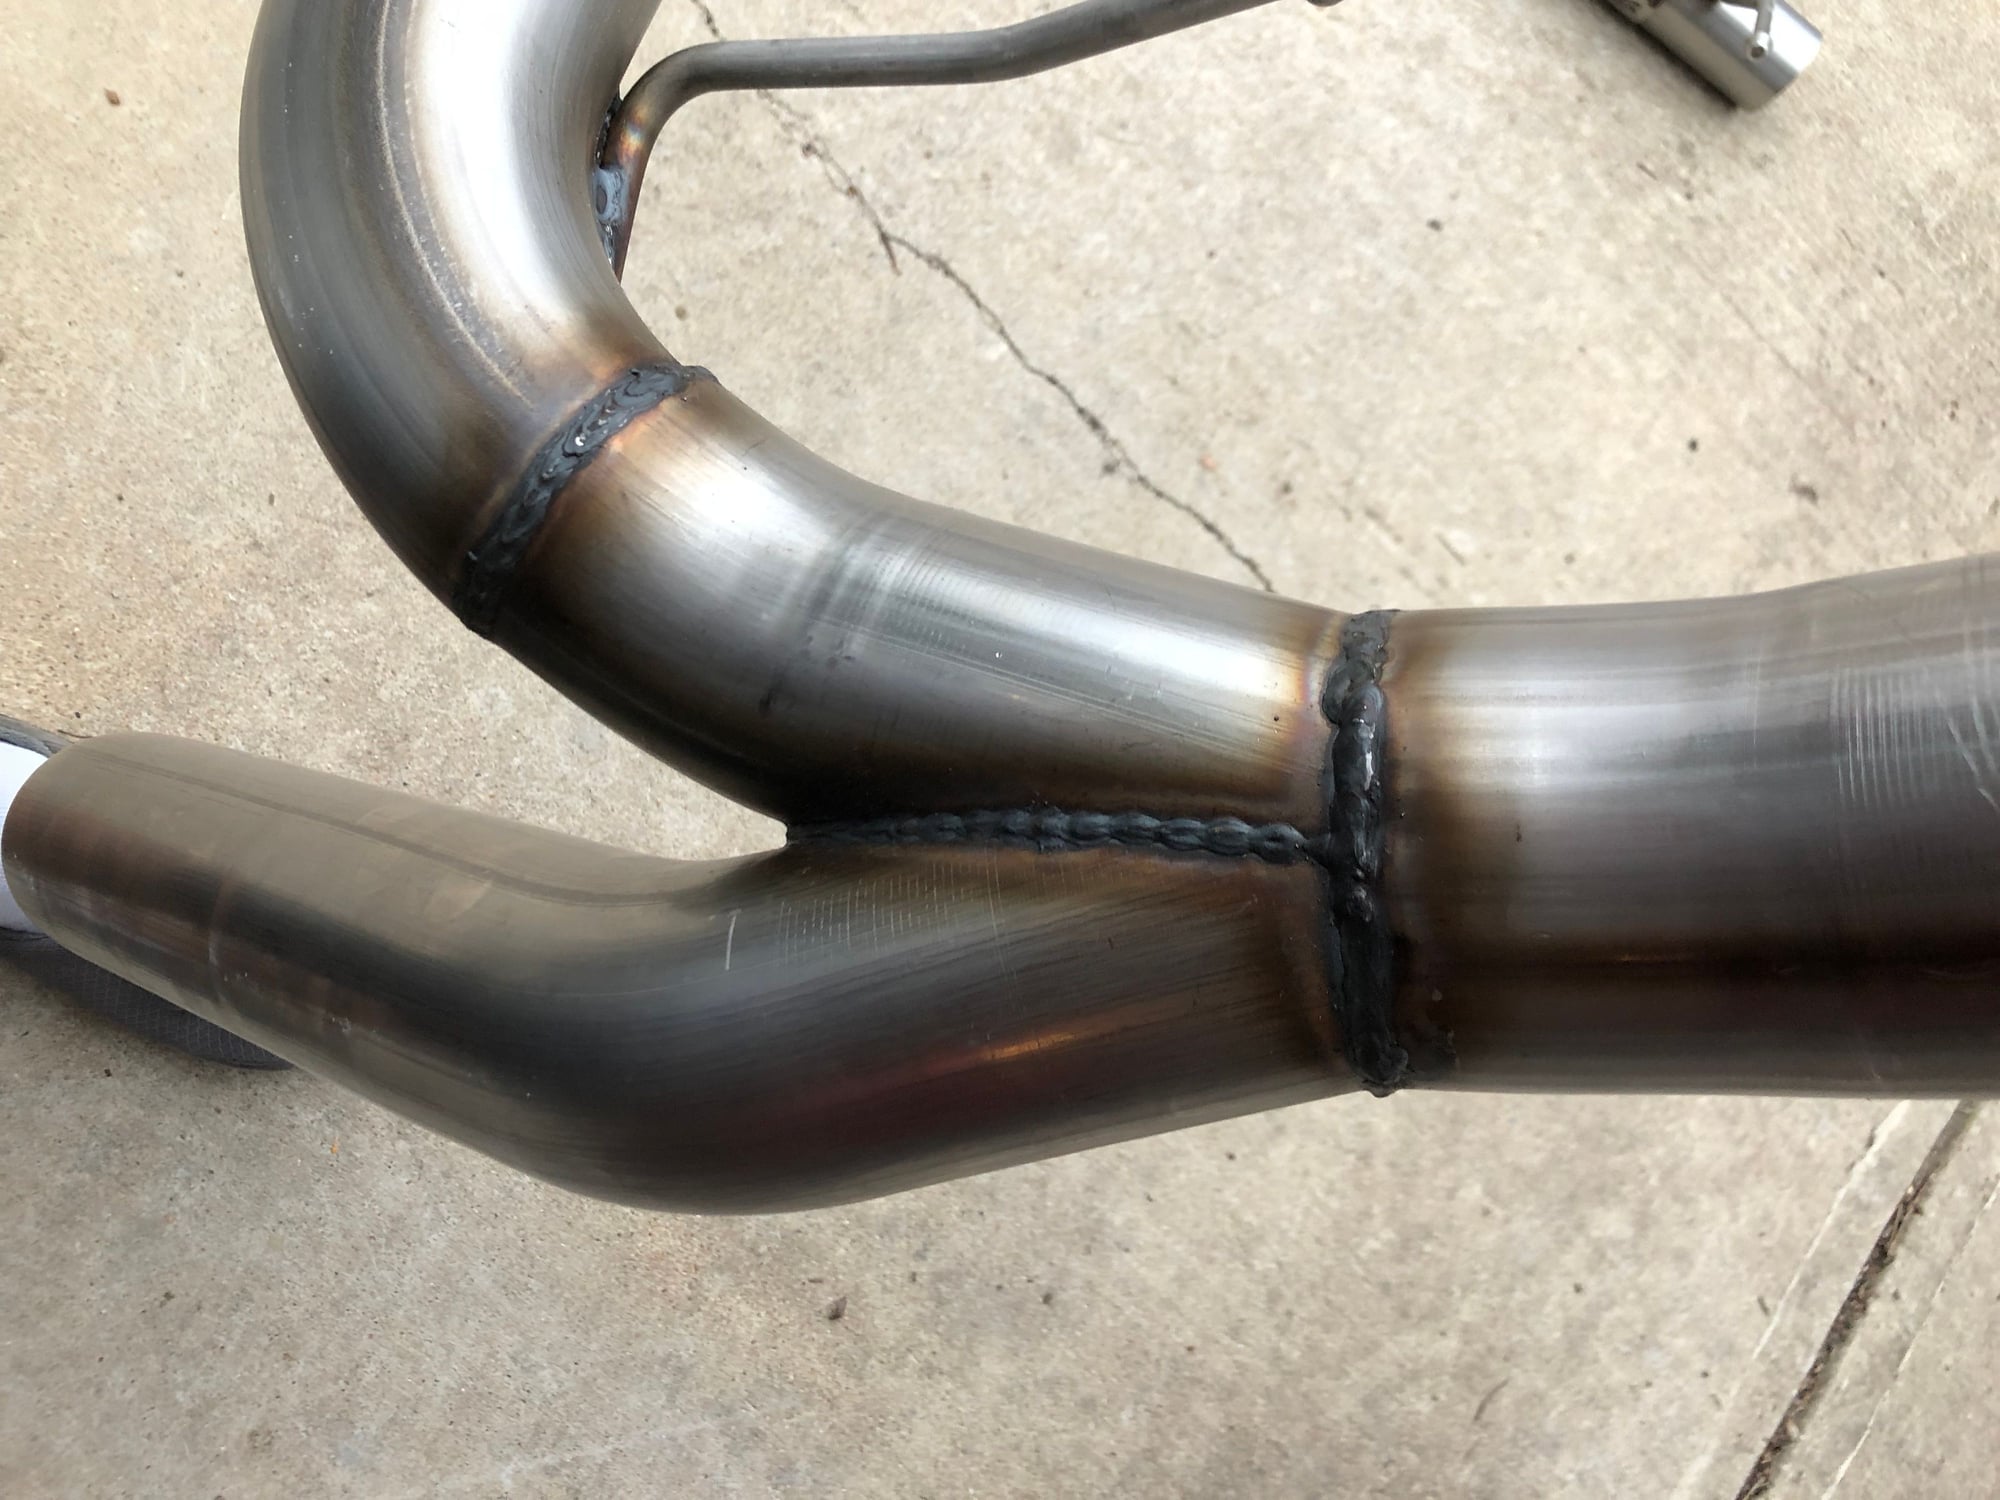 Stainless steel 5.0 y-pipe for 2015+ trucks.....finally - Ford F150 ...